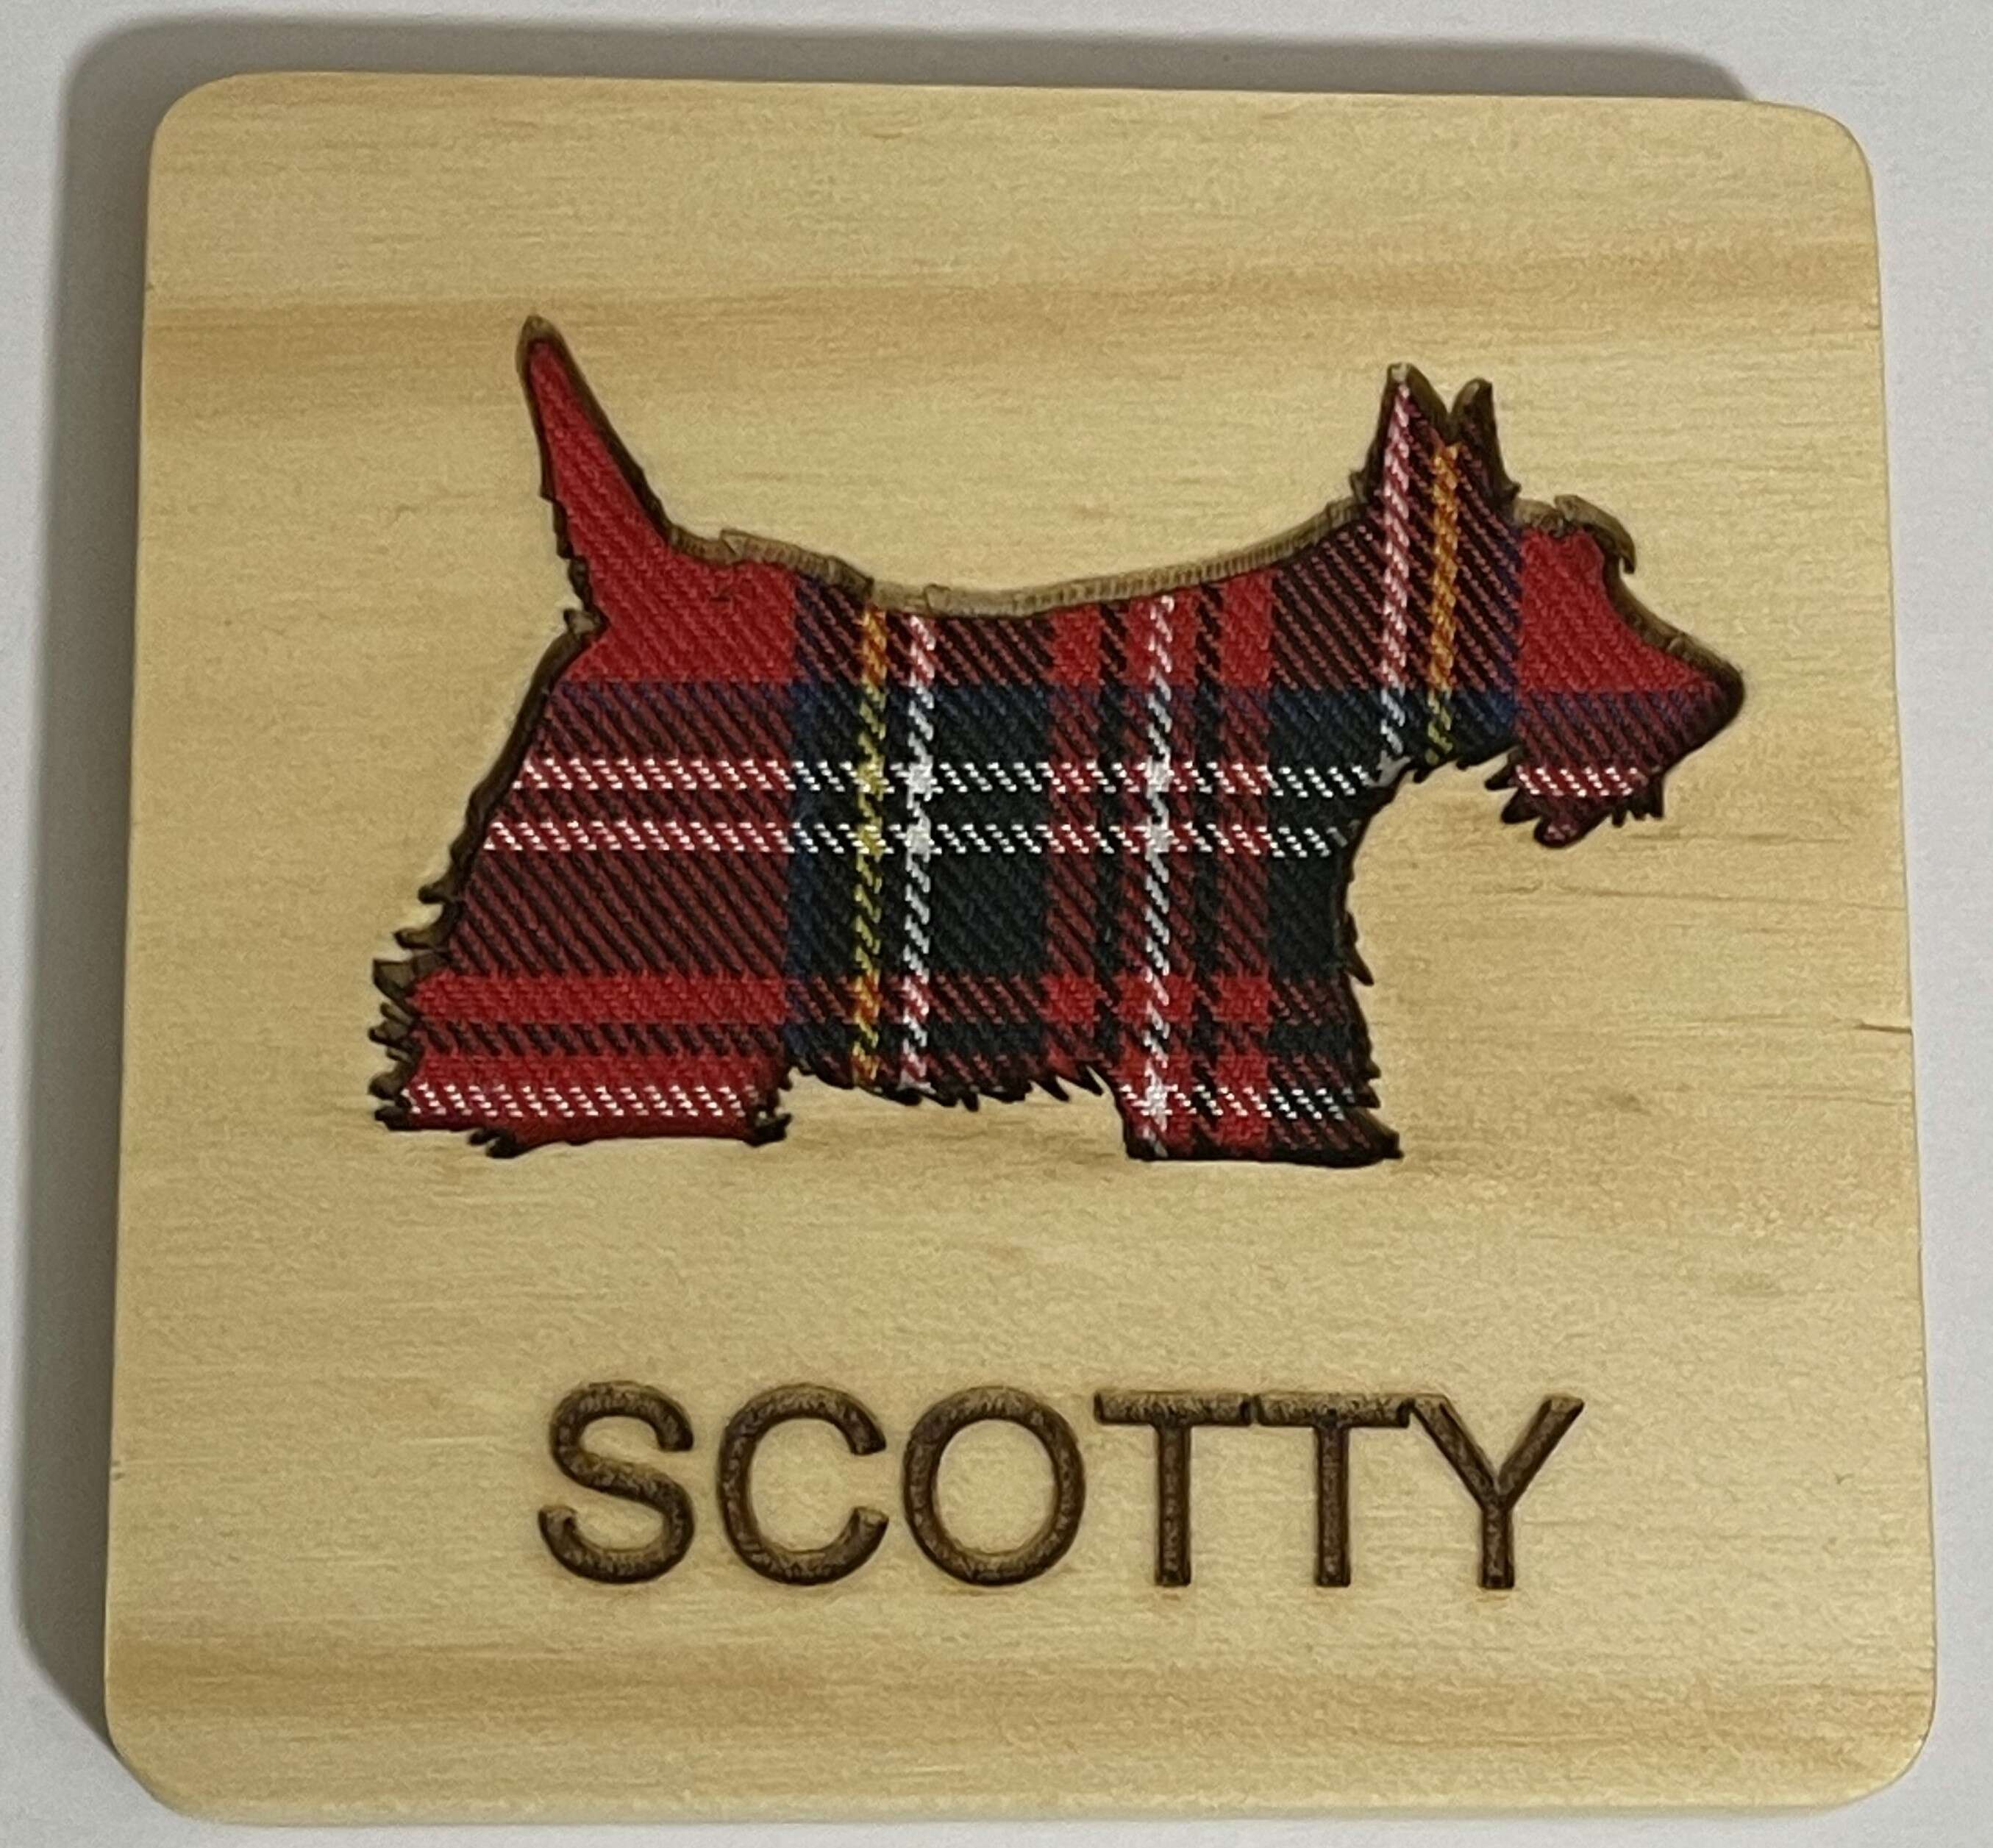 Solid Wood Coaster "Scotty"